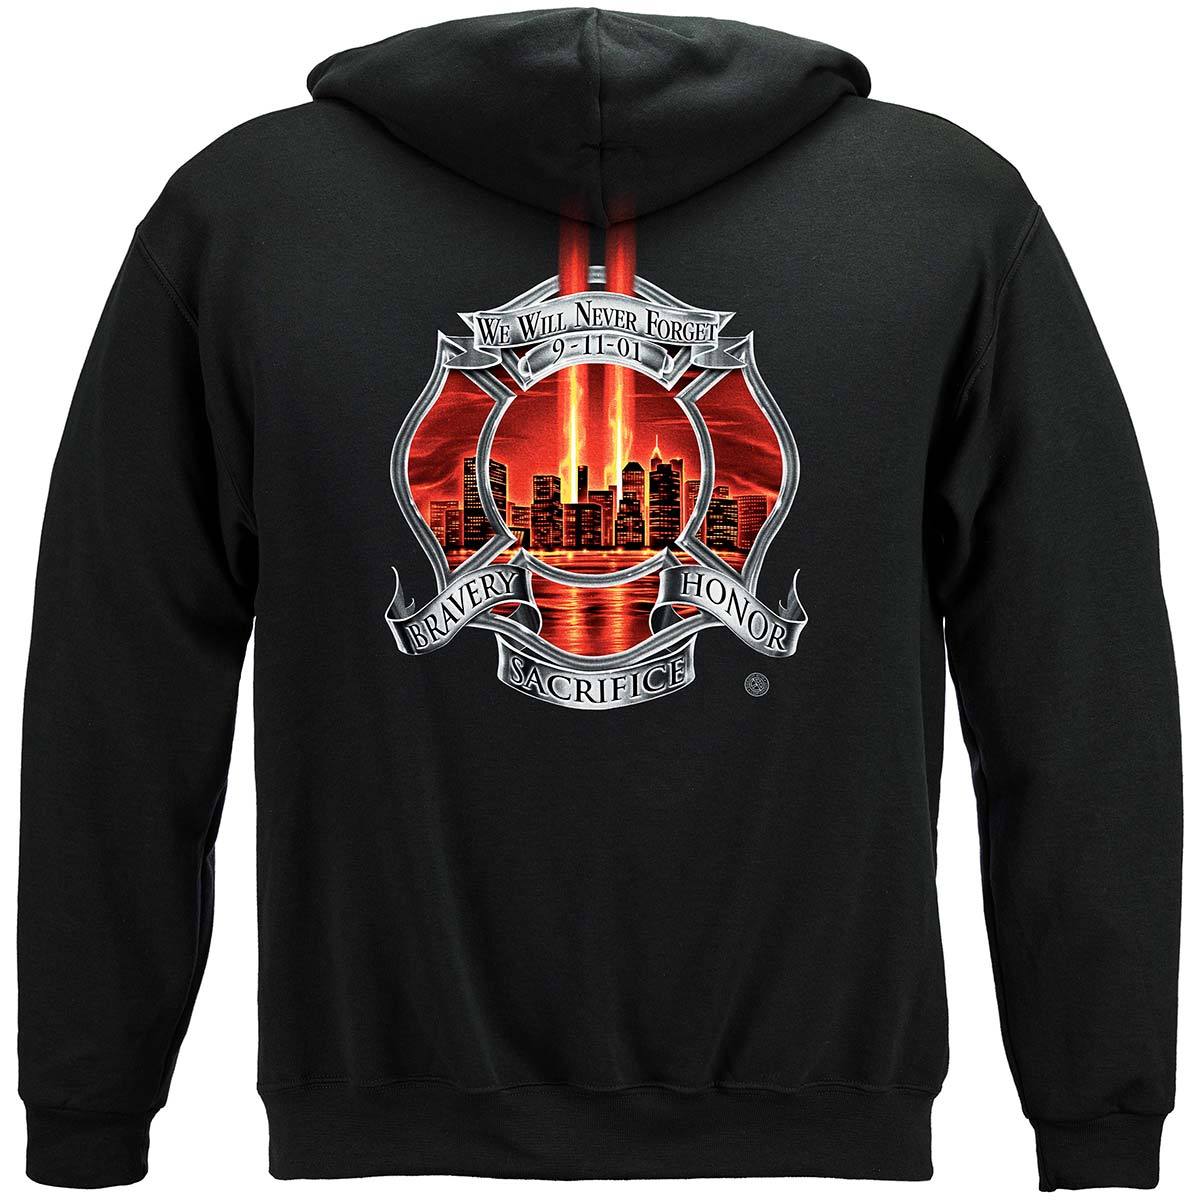 Red Tribute High Honor Firefighter Premium Hooded Sweat Shirt